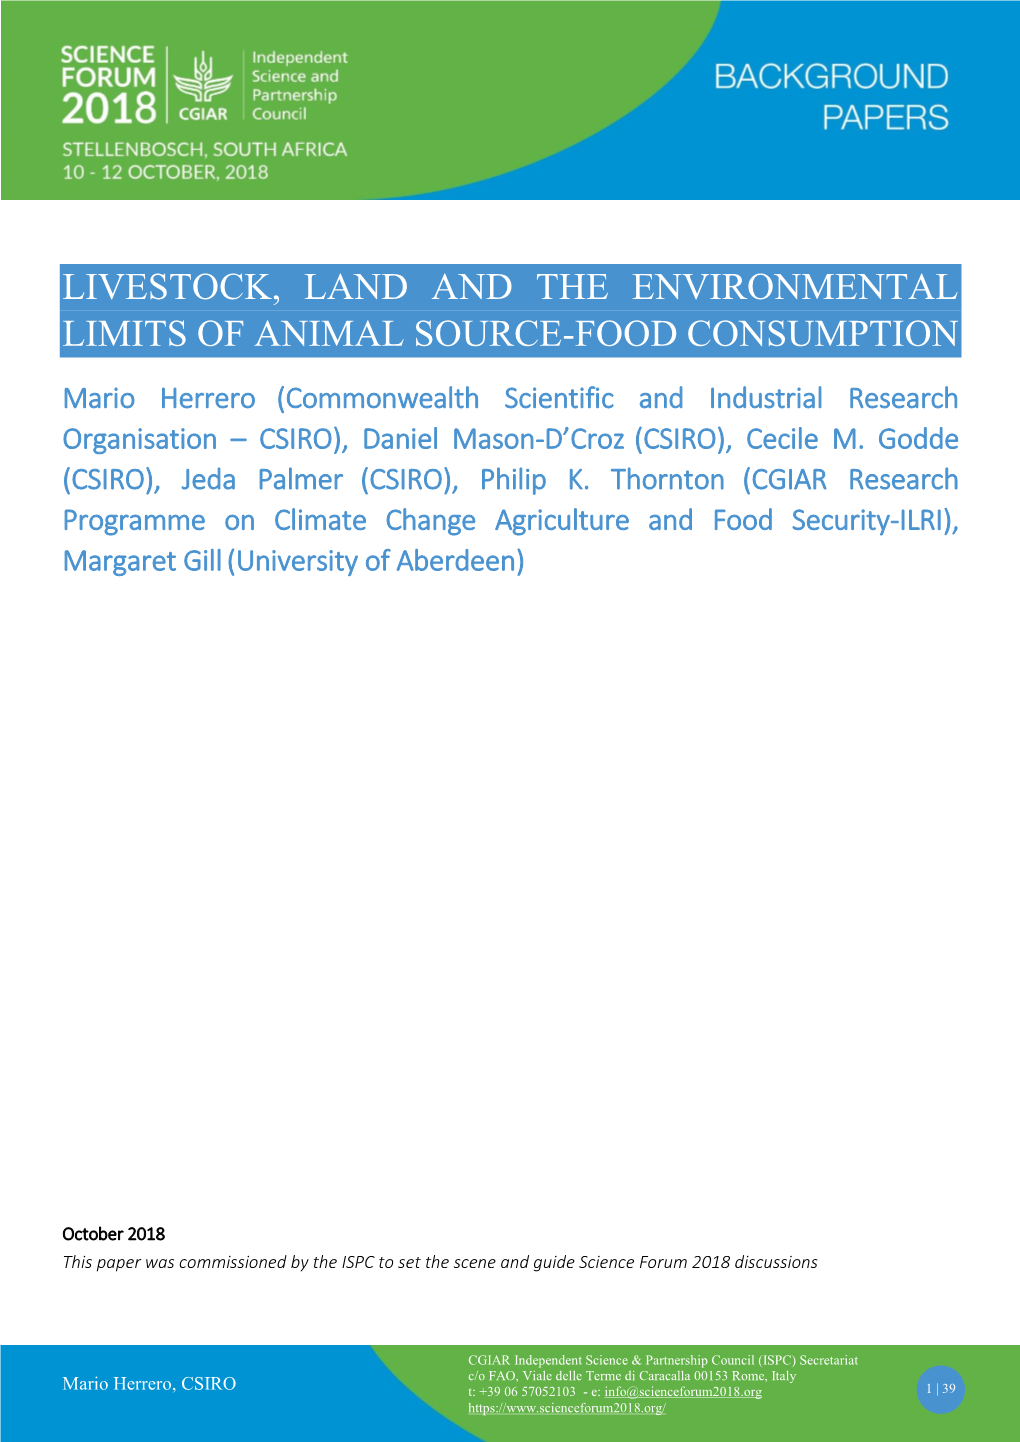 Livestock, Land and the Environmental Limits of Animal Source-Food